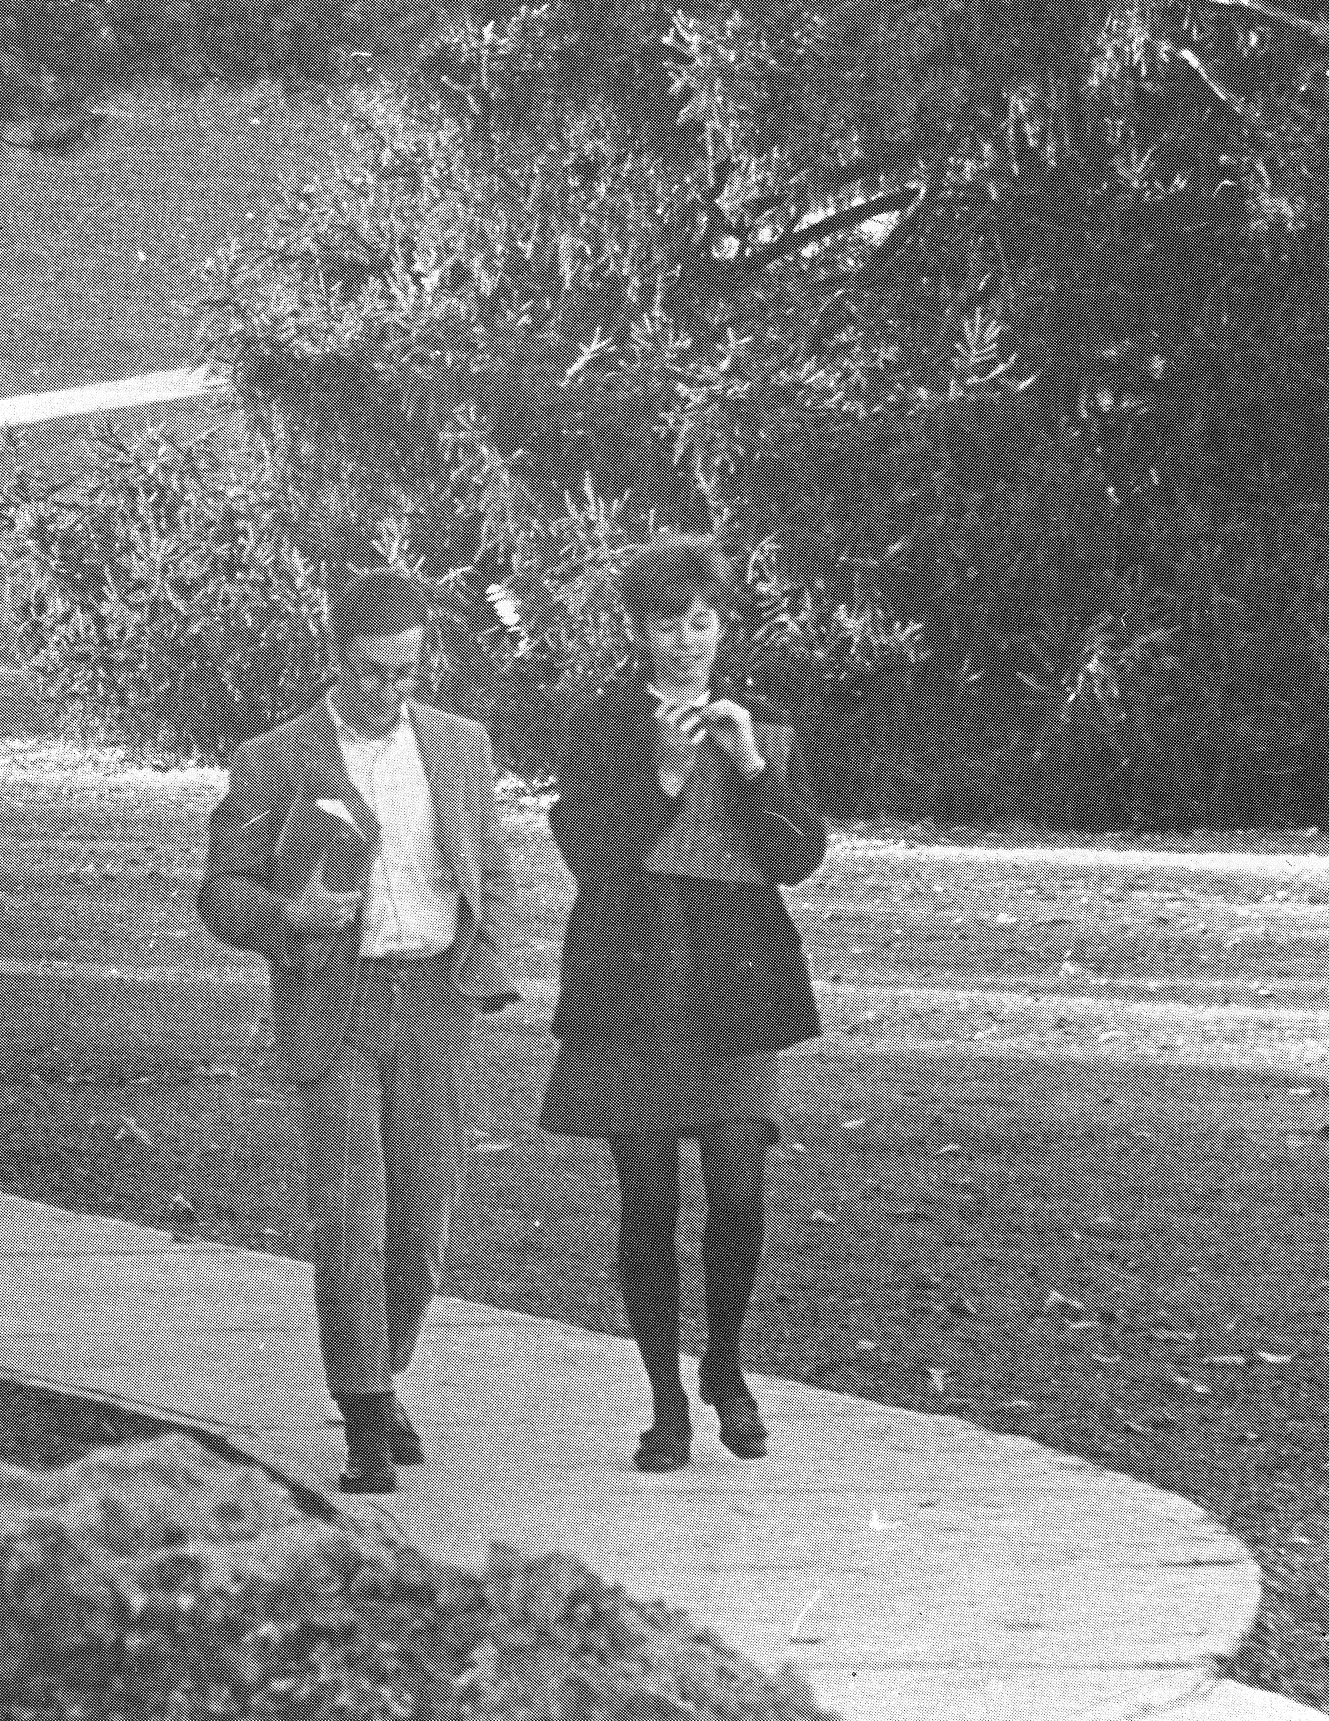 Heading to class, 1969